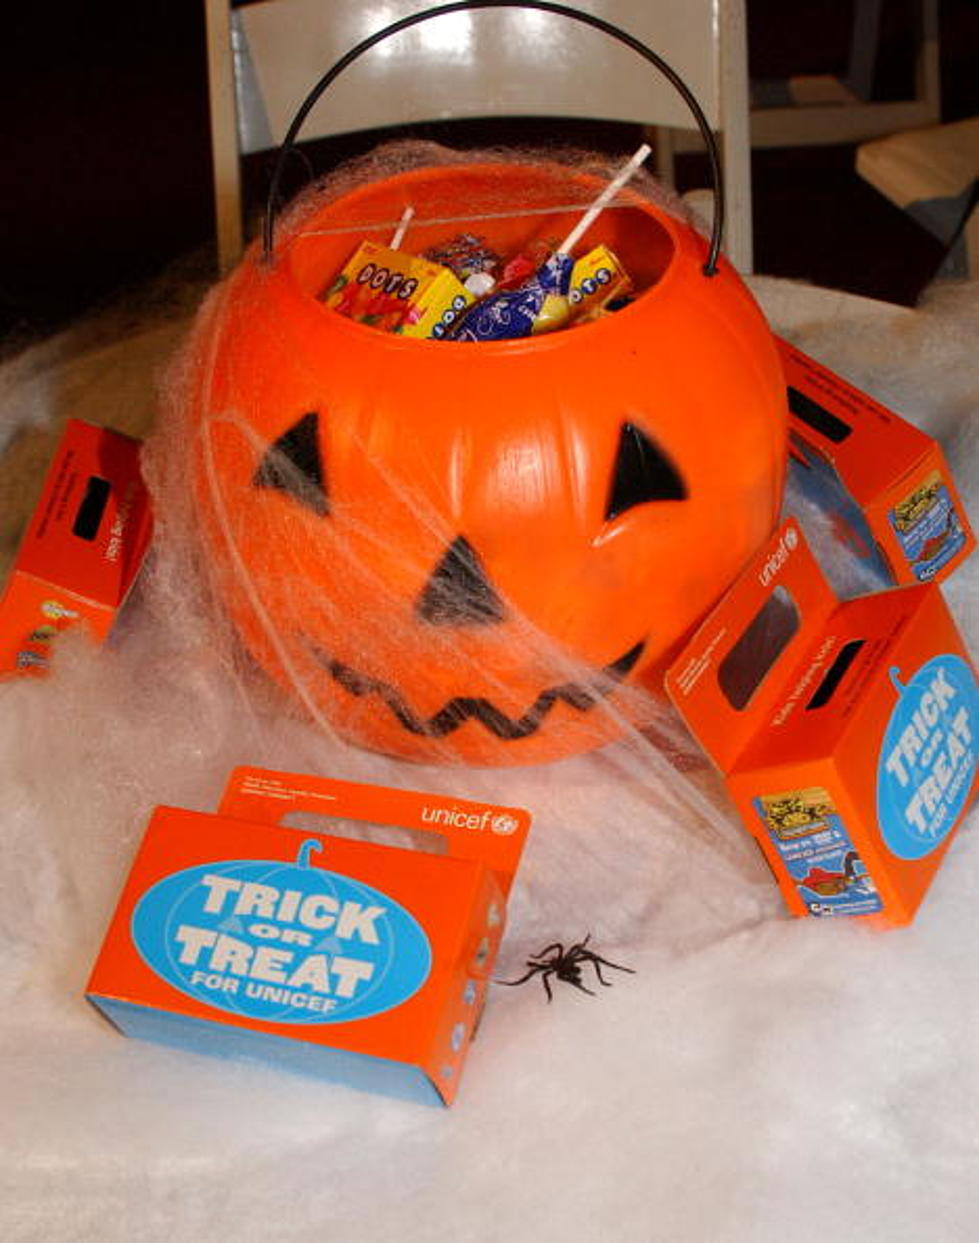 Unhealthy Halloween Candy? Oh, the Horror of it all!